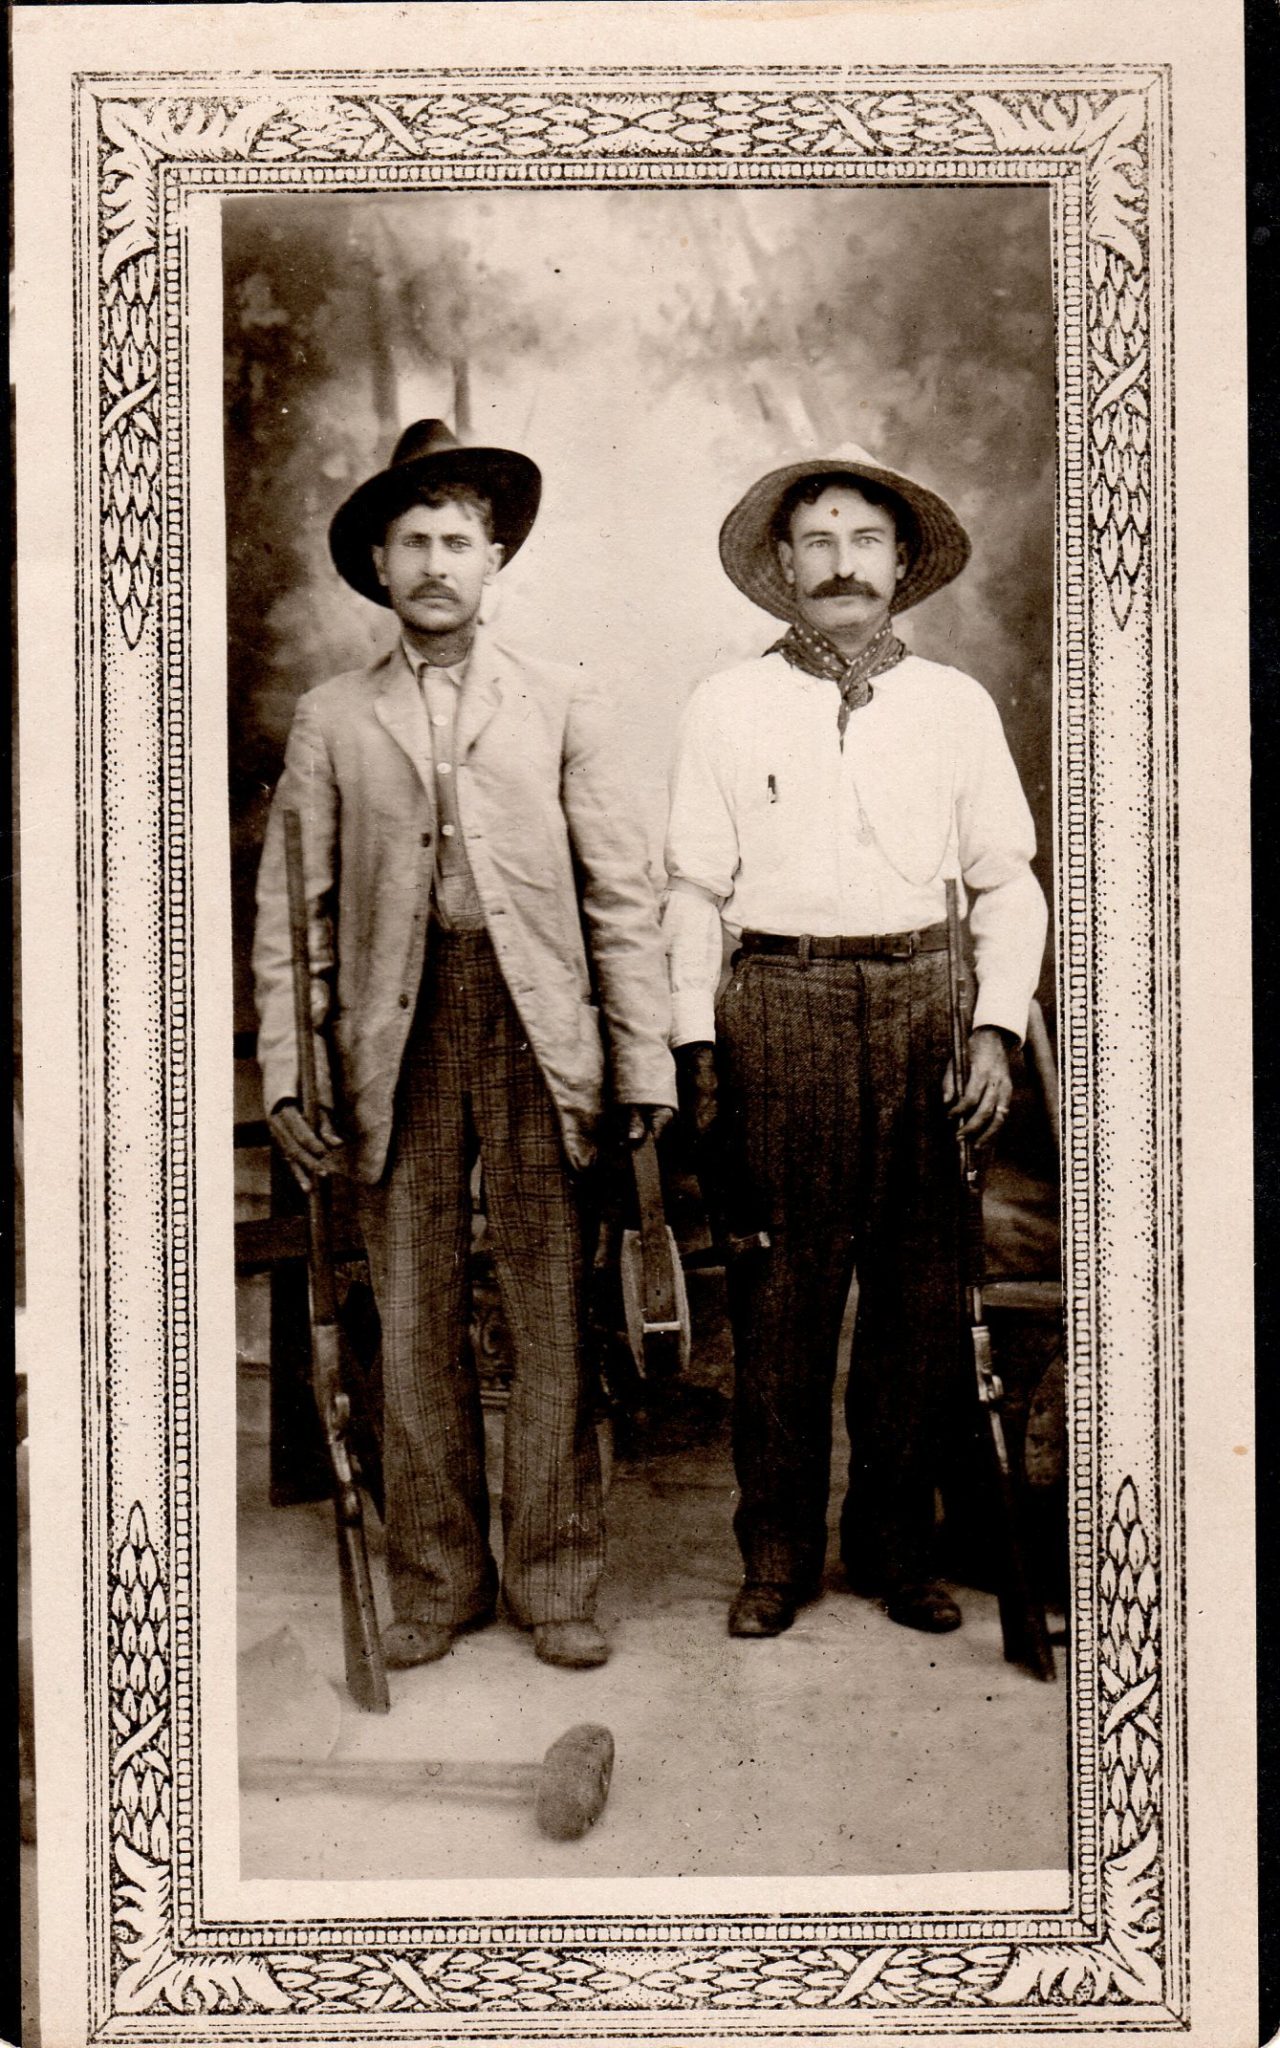 Tucson miner and rancher Frank Mazzoletti on left, Pasco Pecheco on right